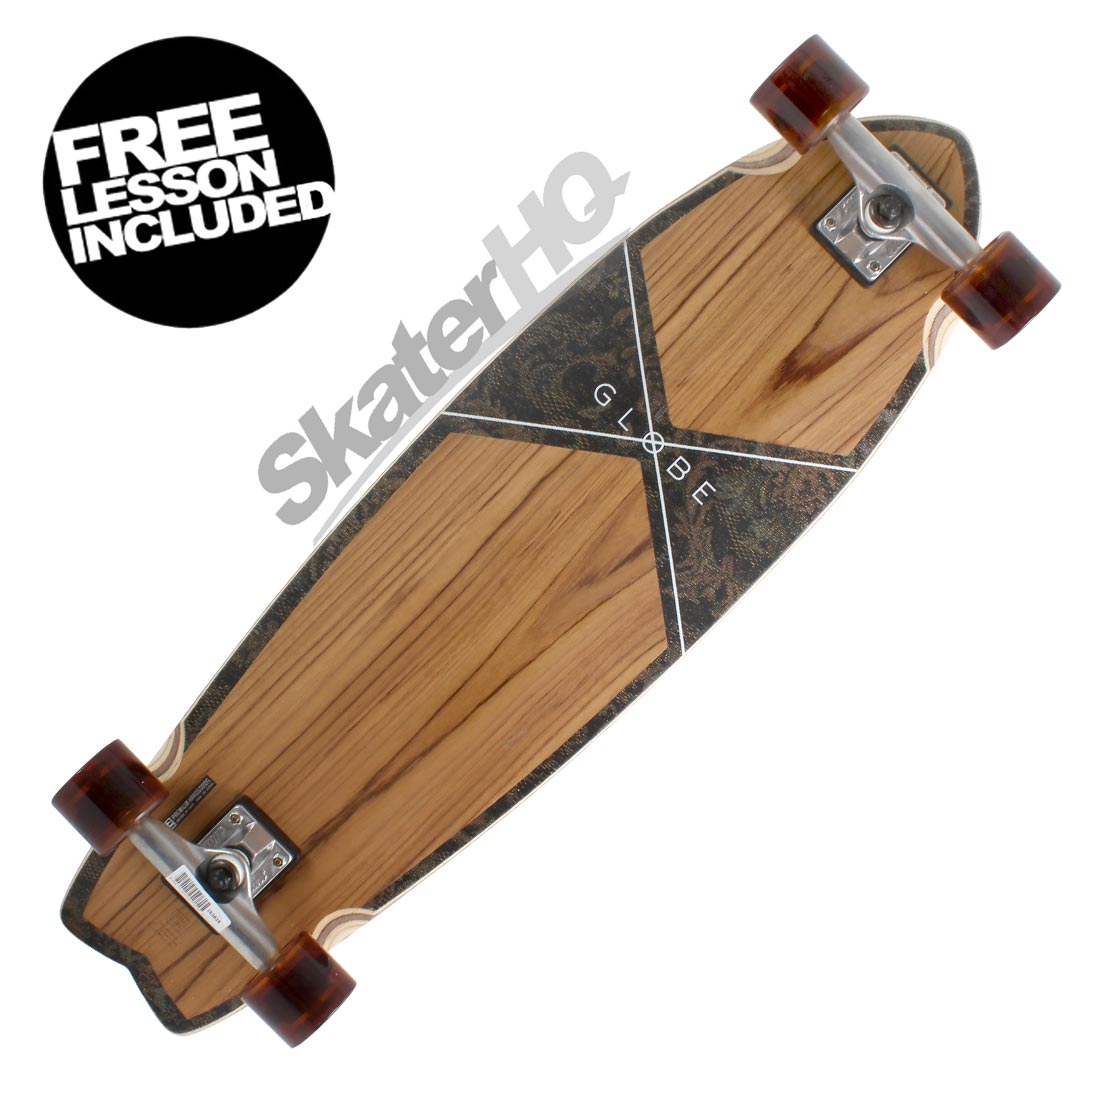 Globe Chromantic 33 Complete - Teak/Floral Couch Skateboard Compl Cruisers